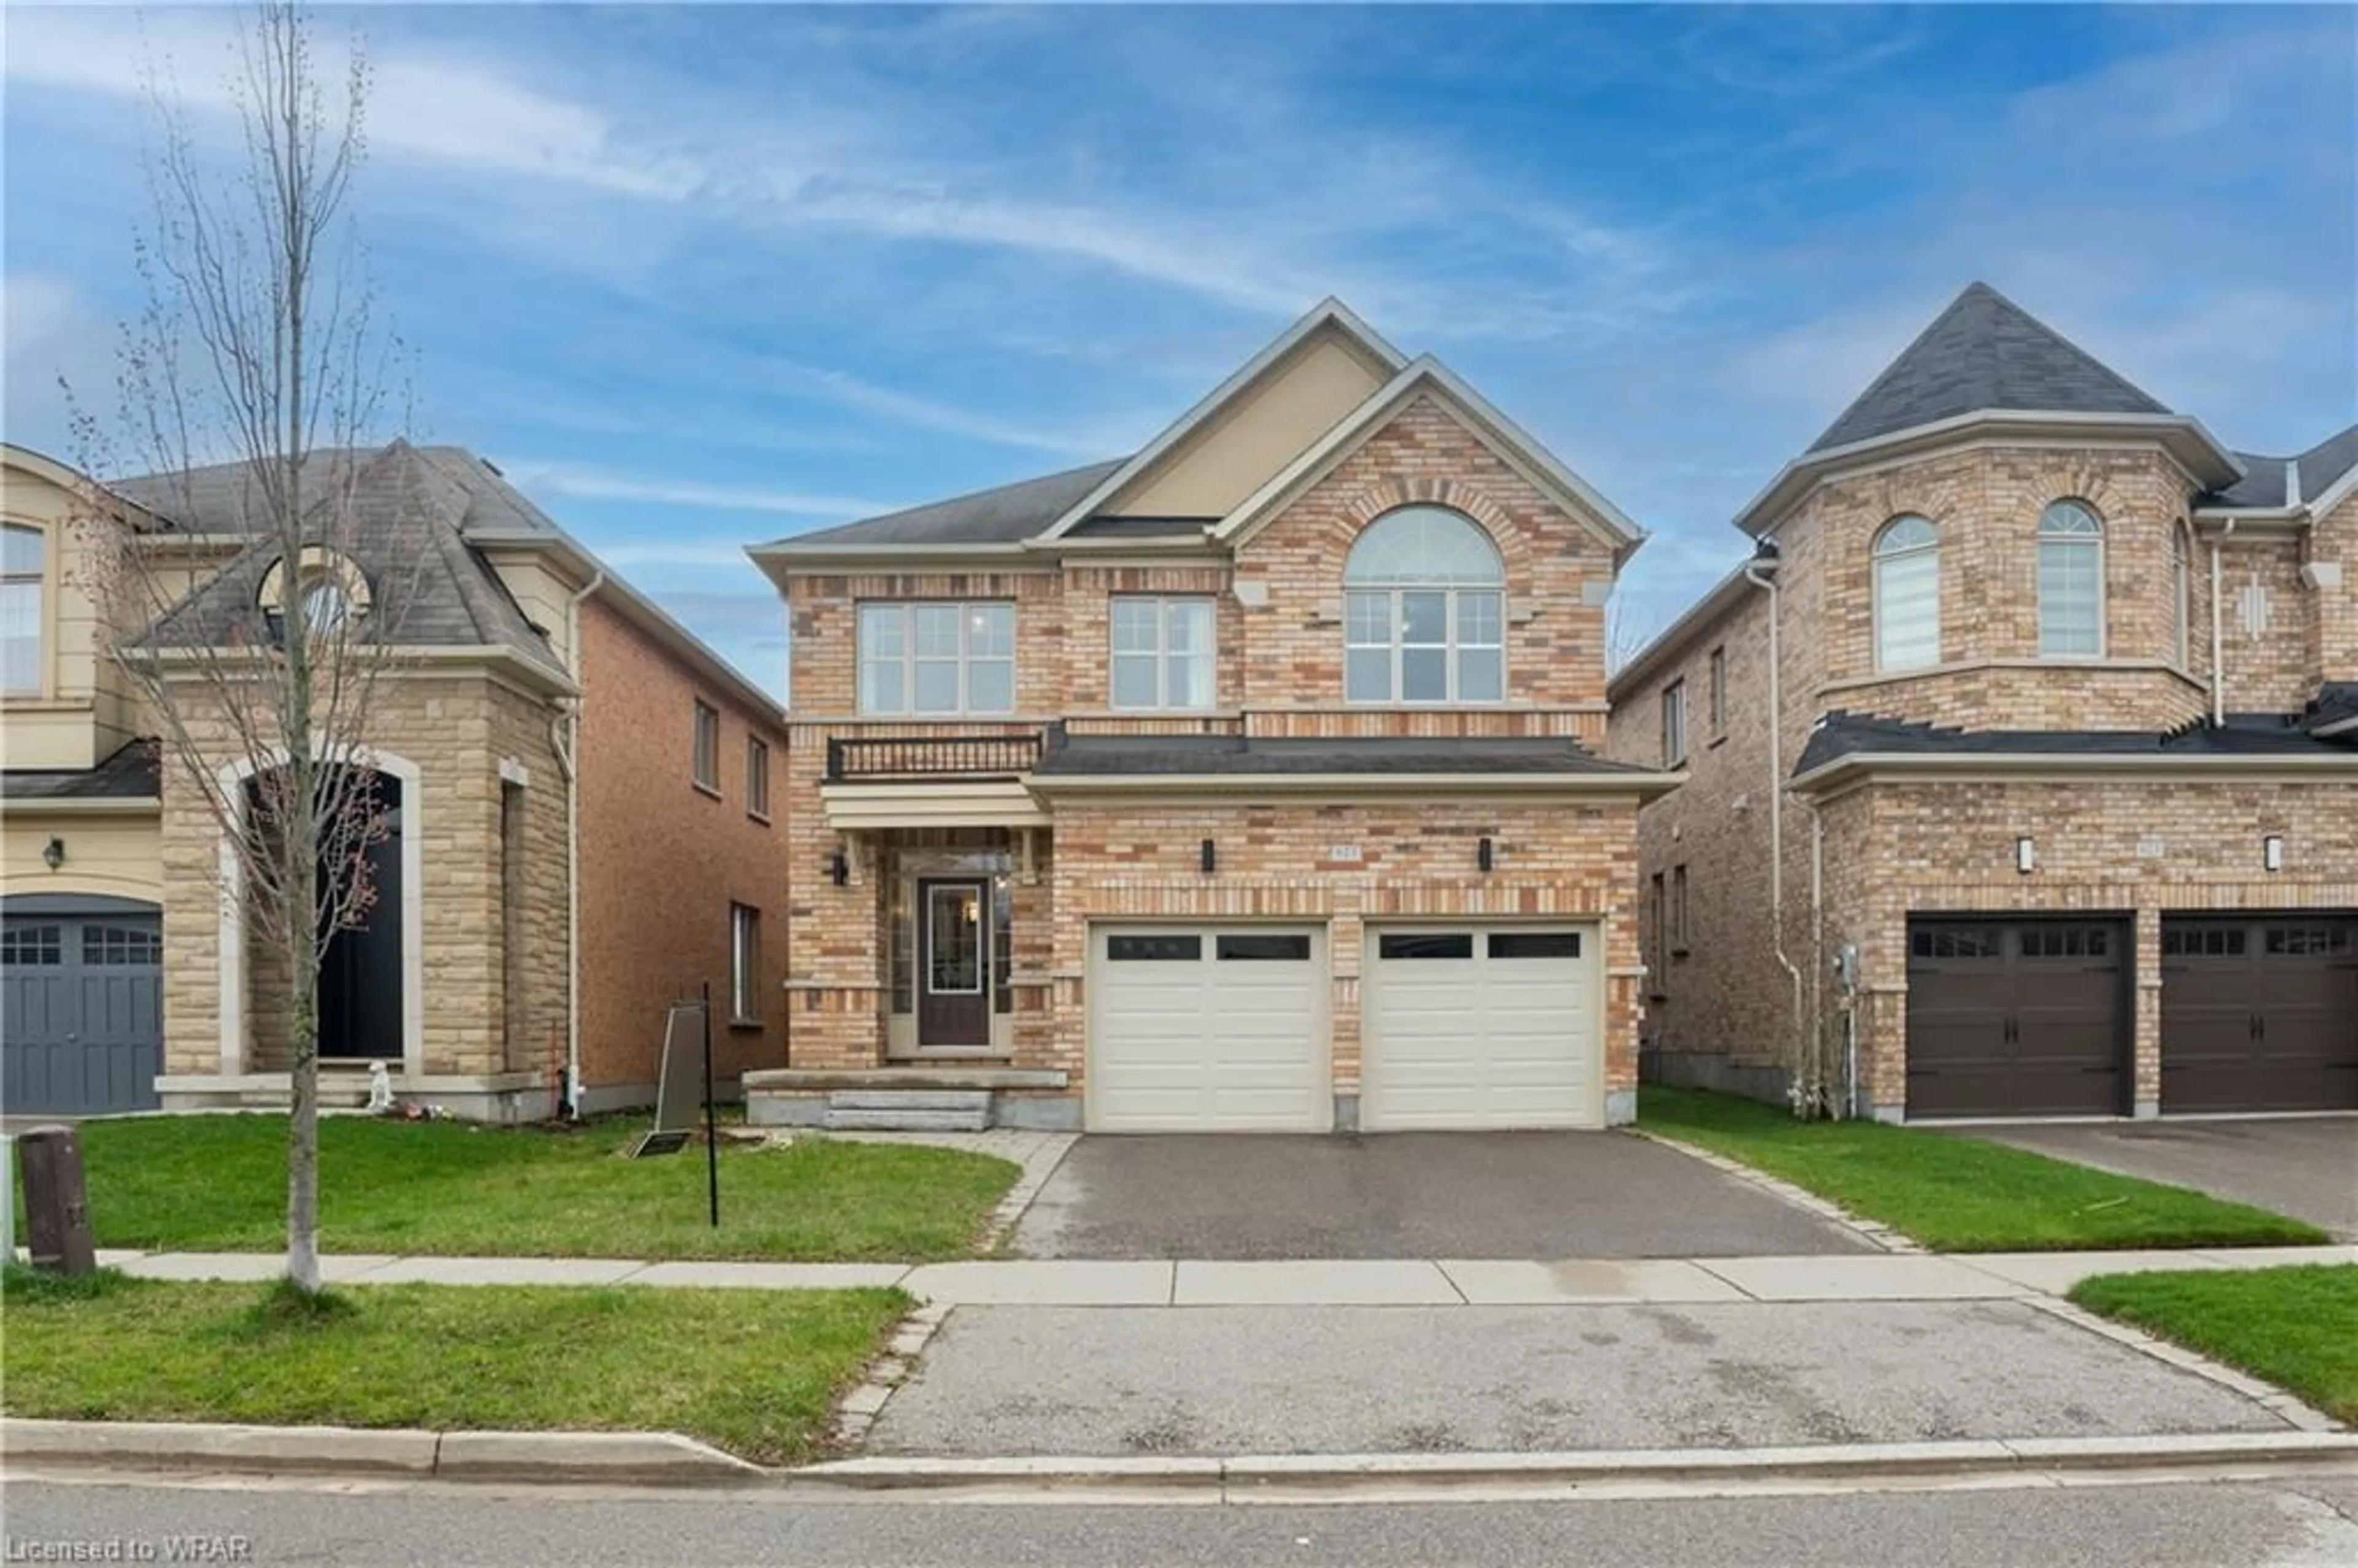 Home with brick exterior material for 621 Pinery Trail, Waterloo Ontario N2V 2Y6